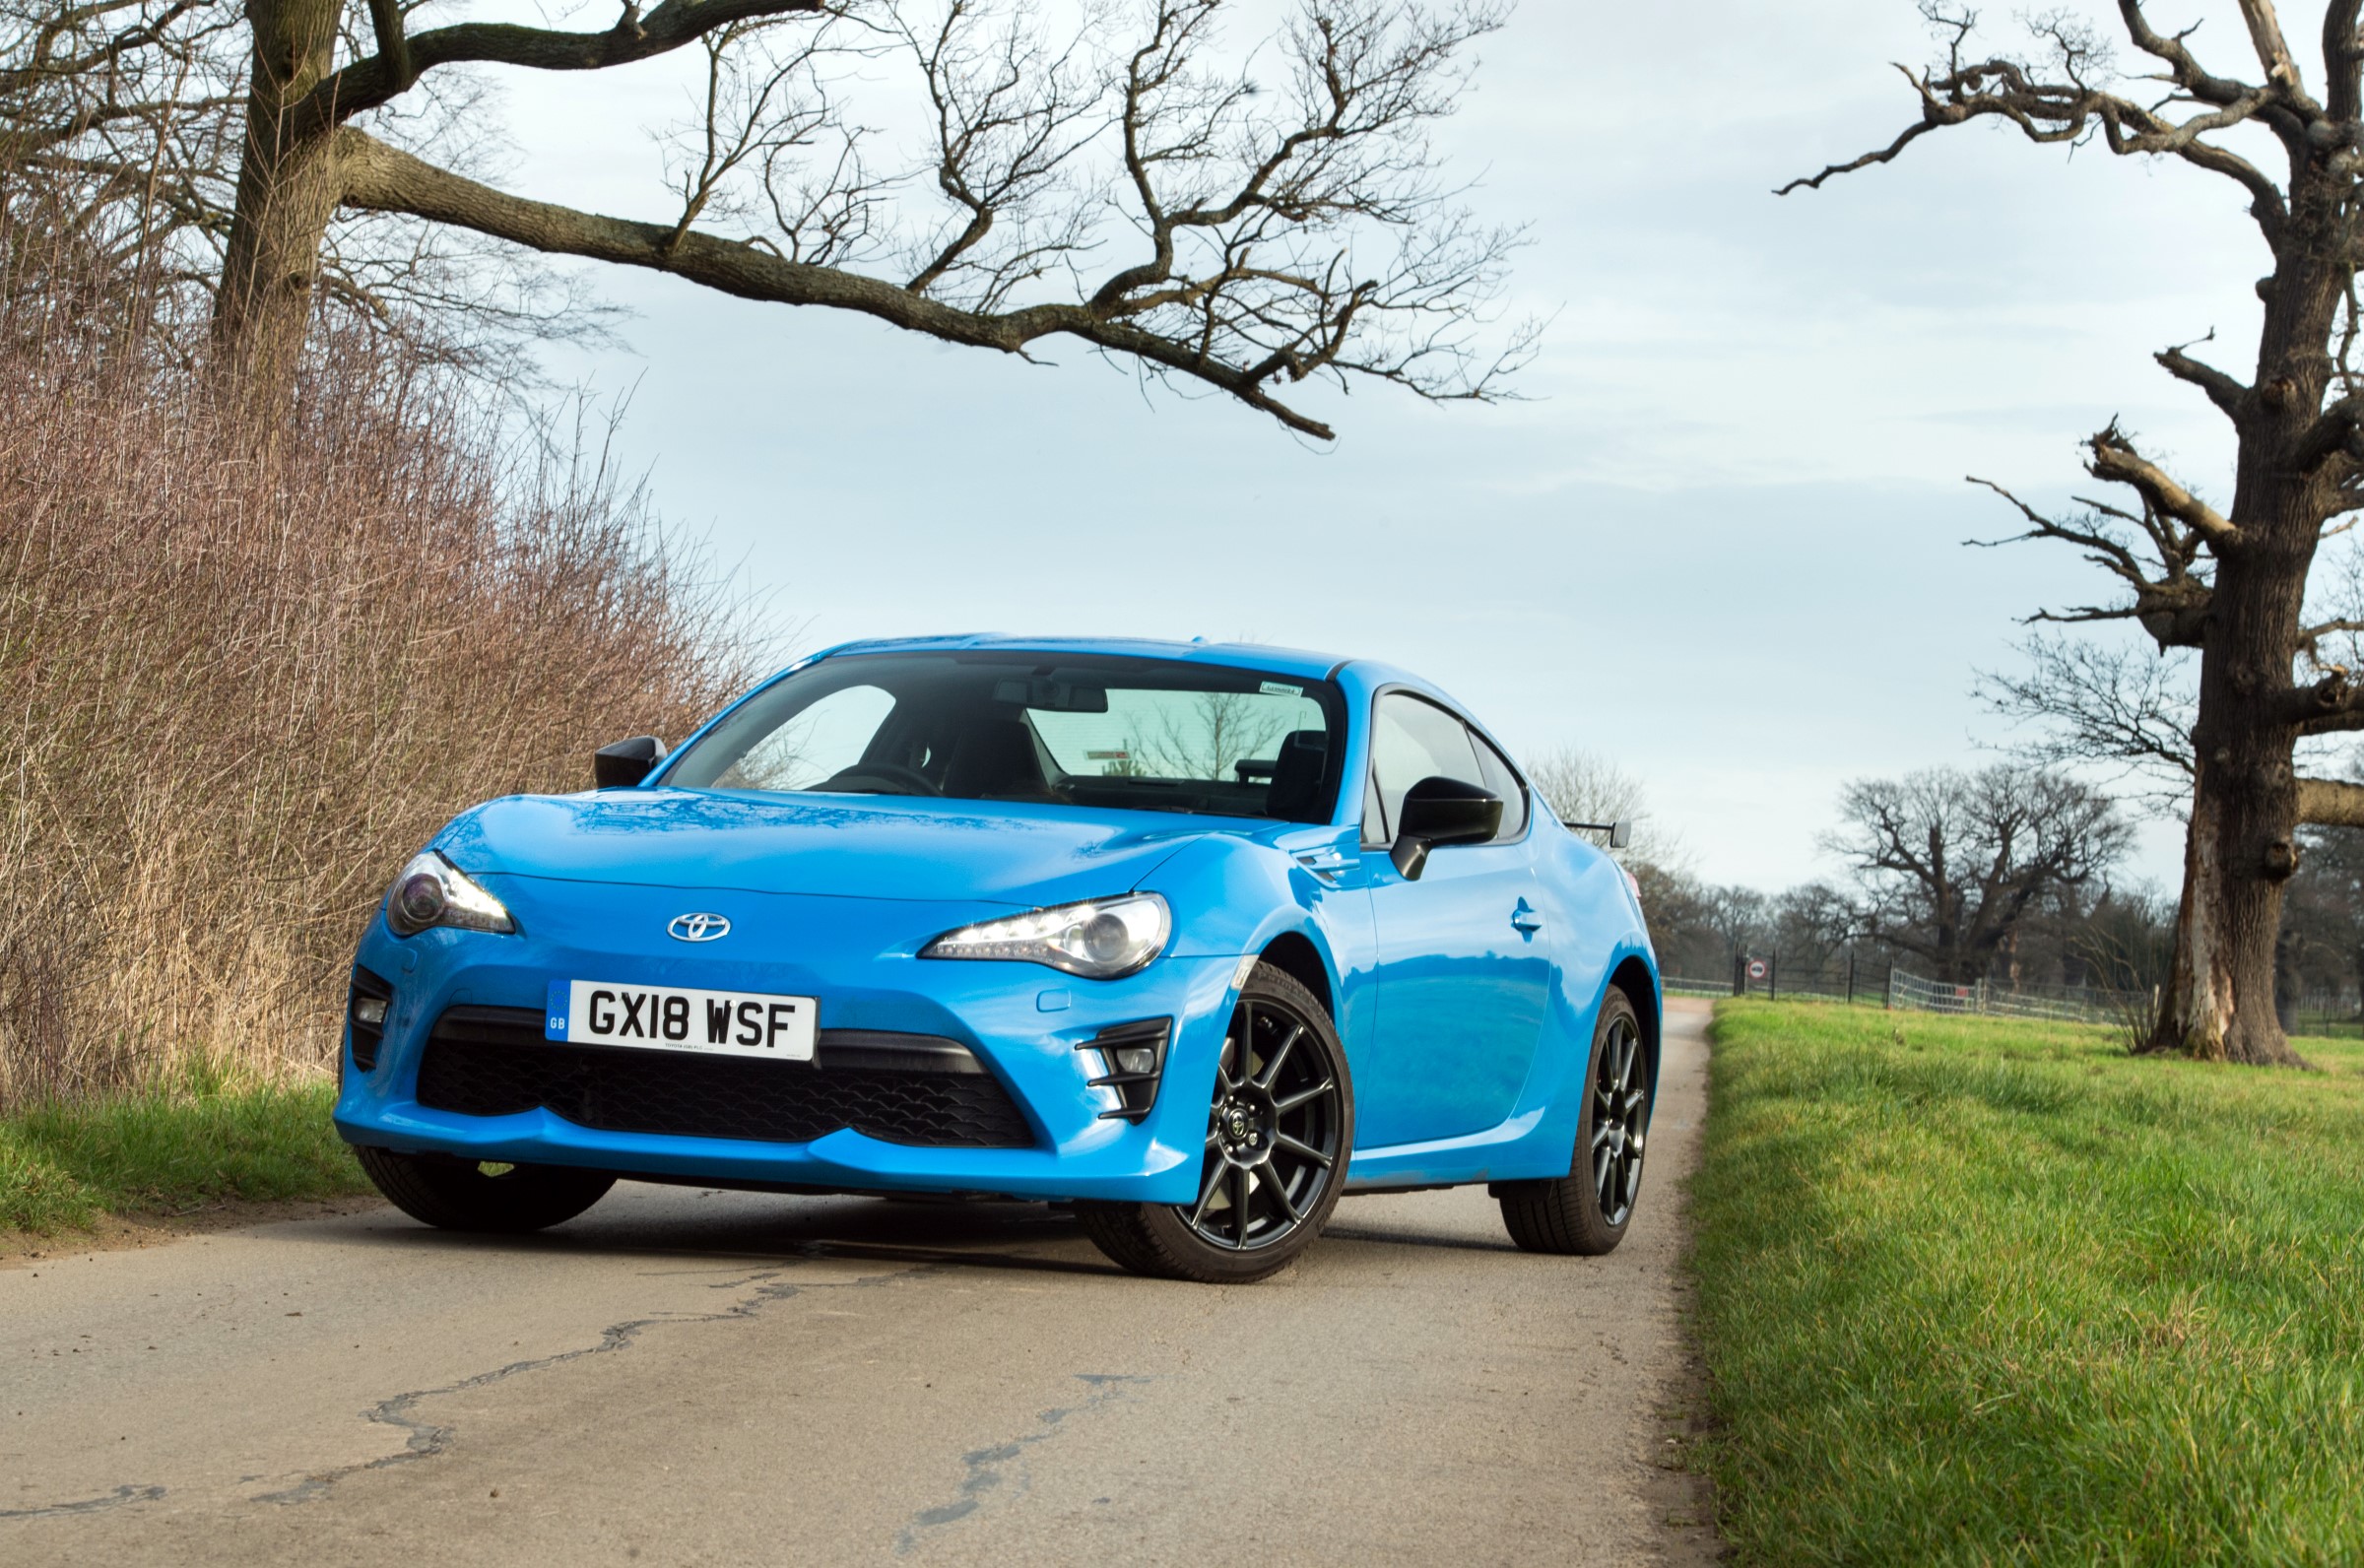 Toyota GT86 review prices, specs and 0-60 time evo